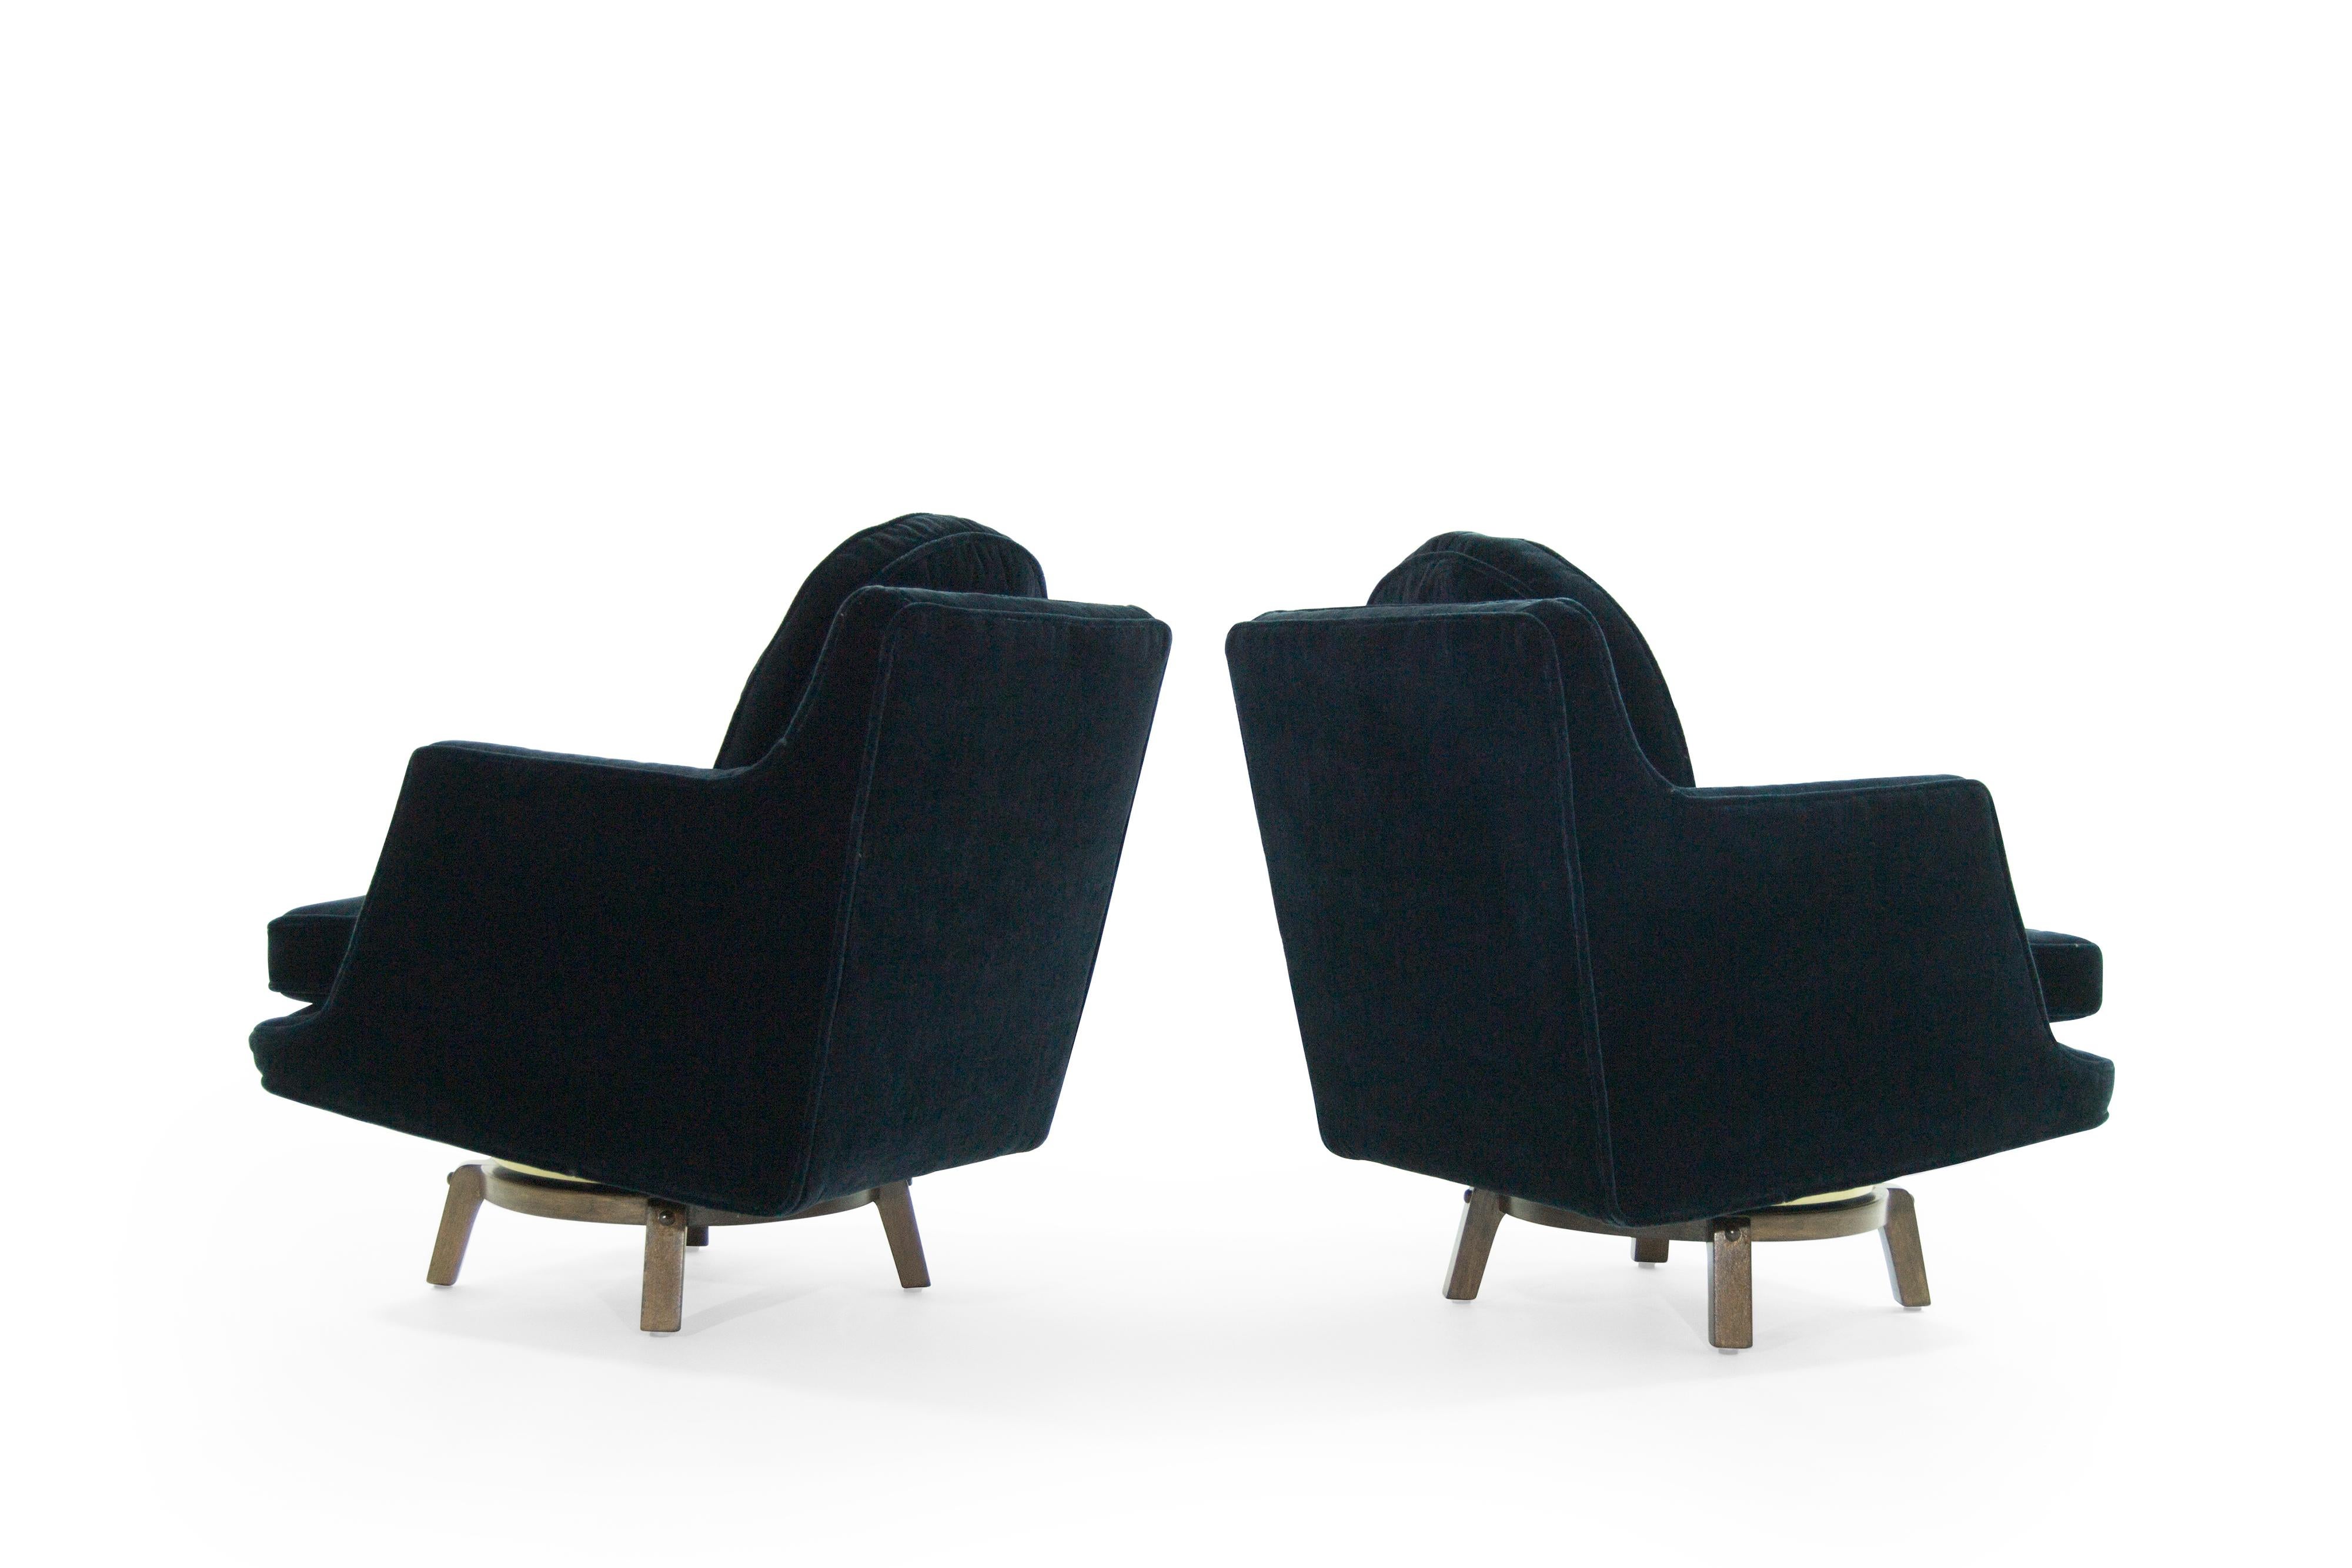 20th Century Brass Accented Swivel Chairs by Edward Wormley for Dunbar, 1950s